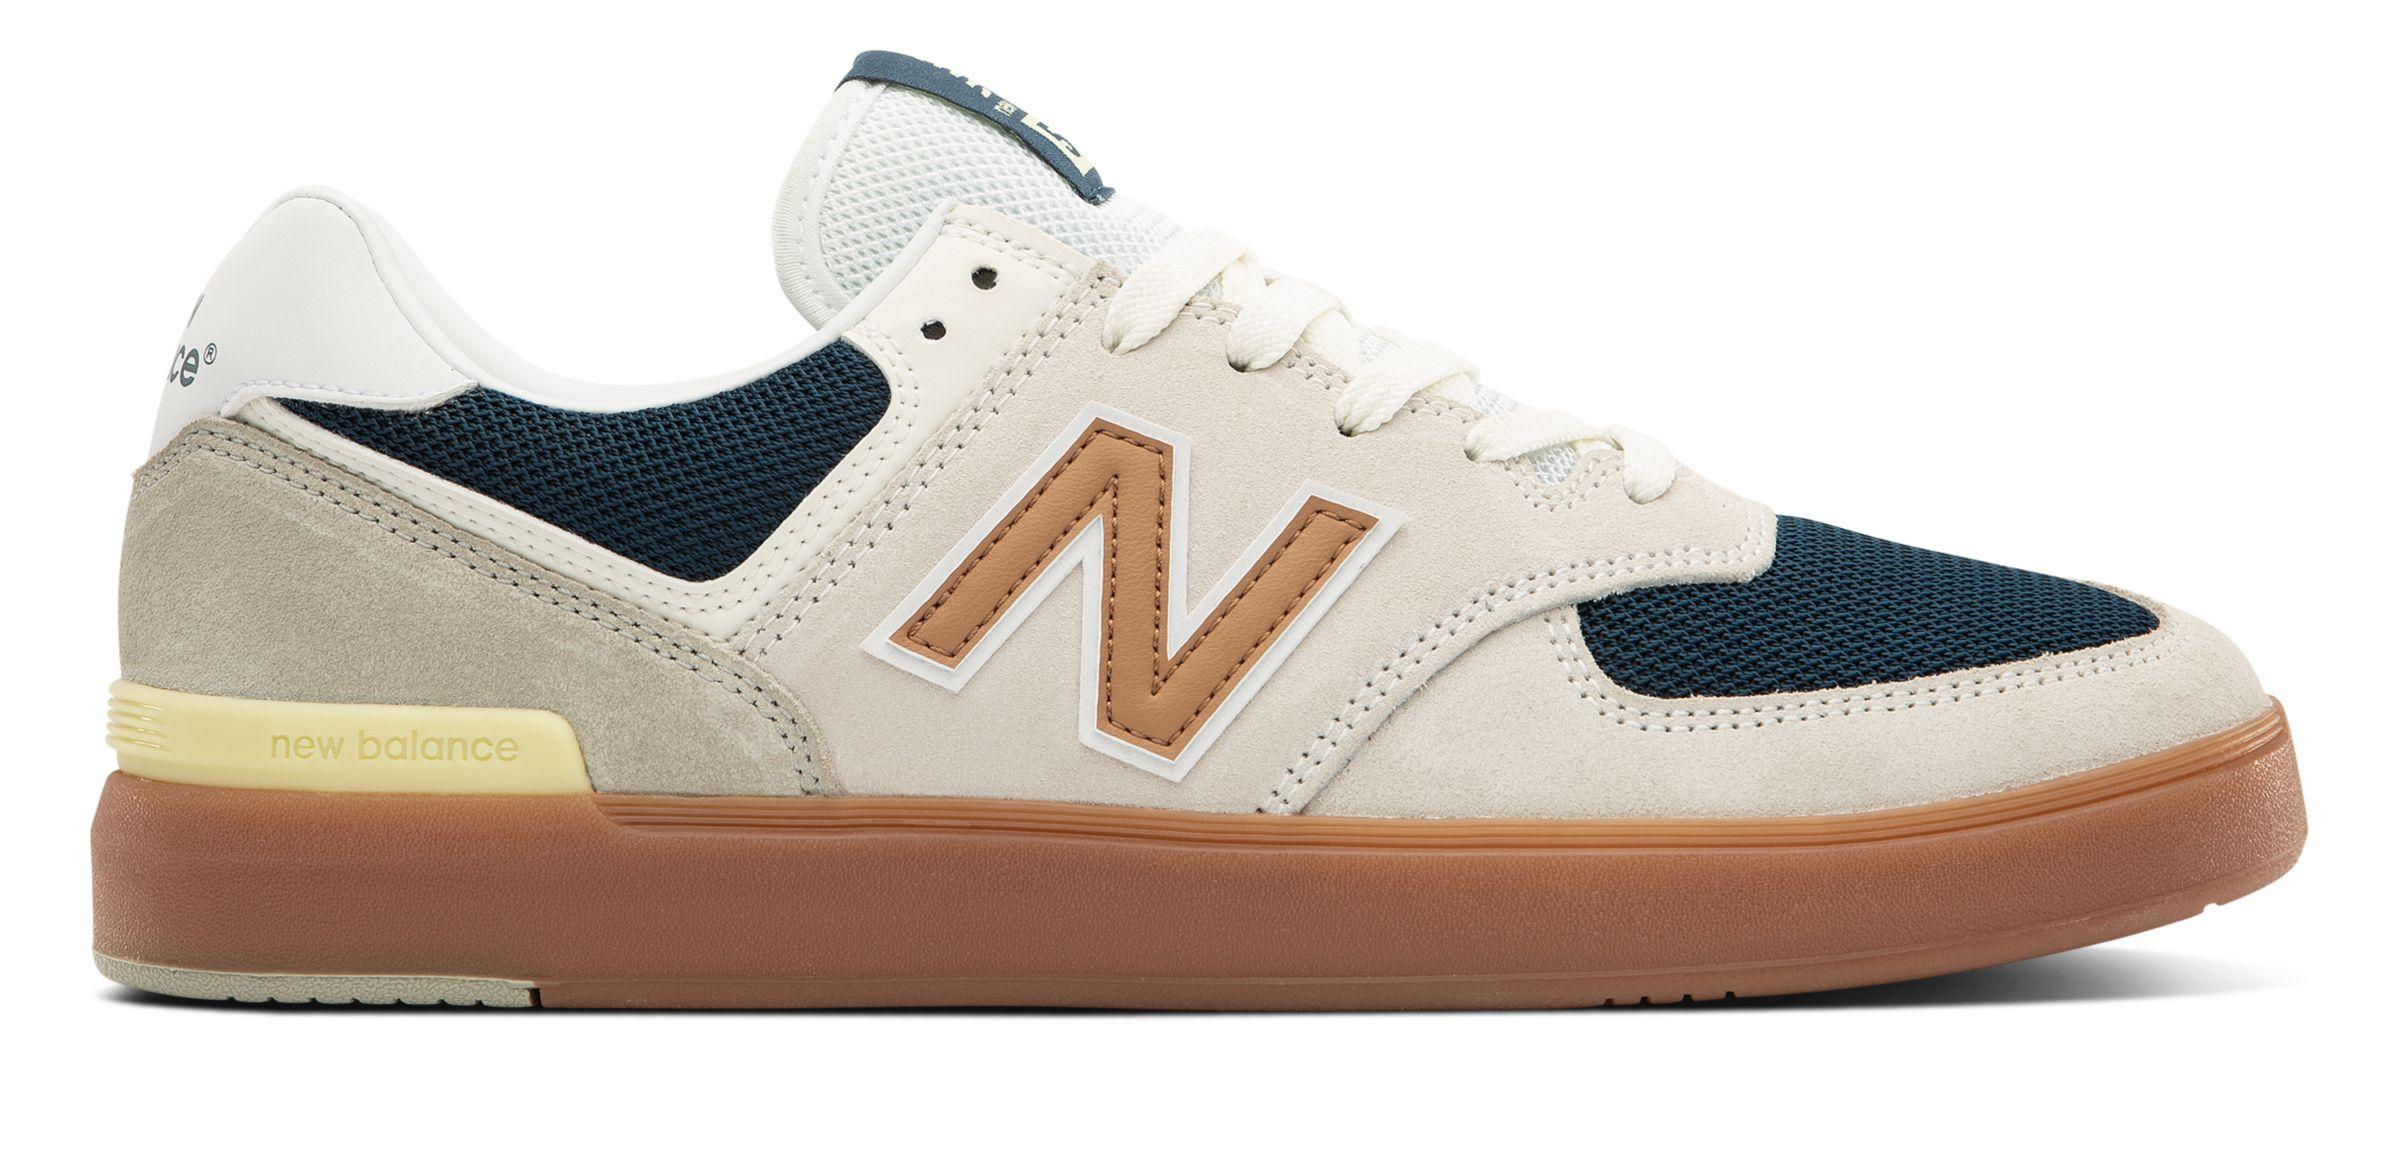 New Balance Suede All Coasts 574 in White/Gold (White) - Lyst